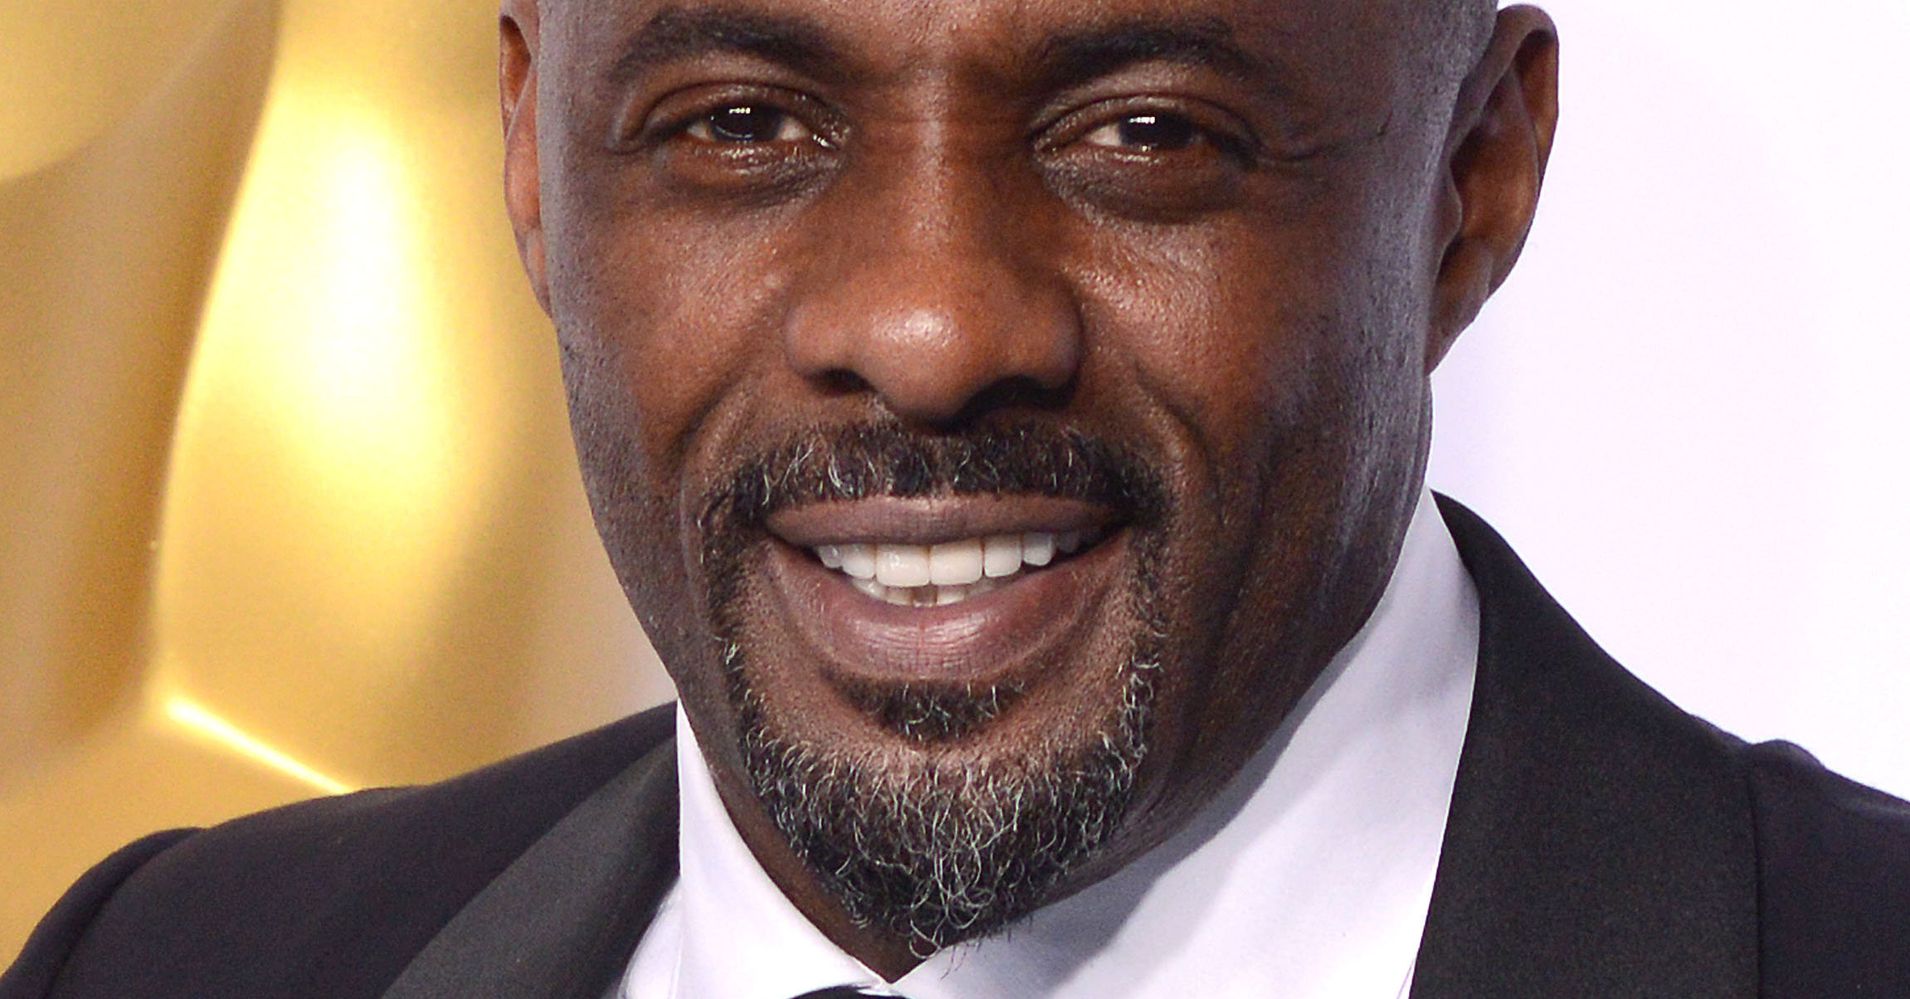 Calling Idris Elba 'Too Street' Is Racist, Just Not For The Reason You ...